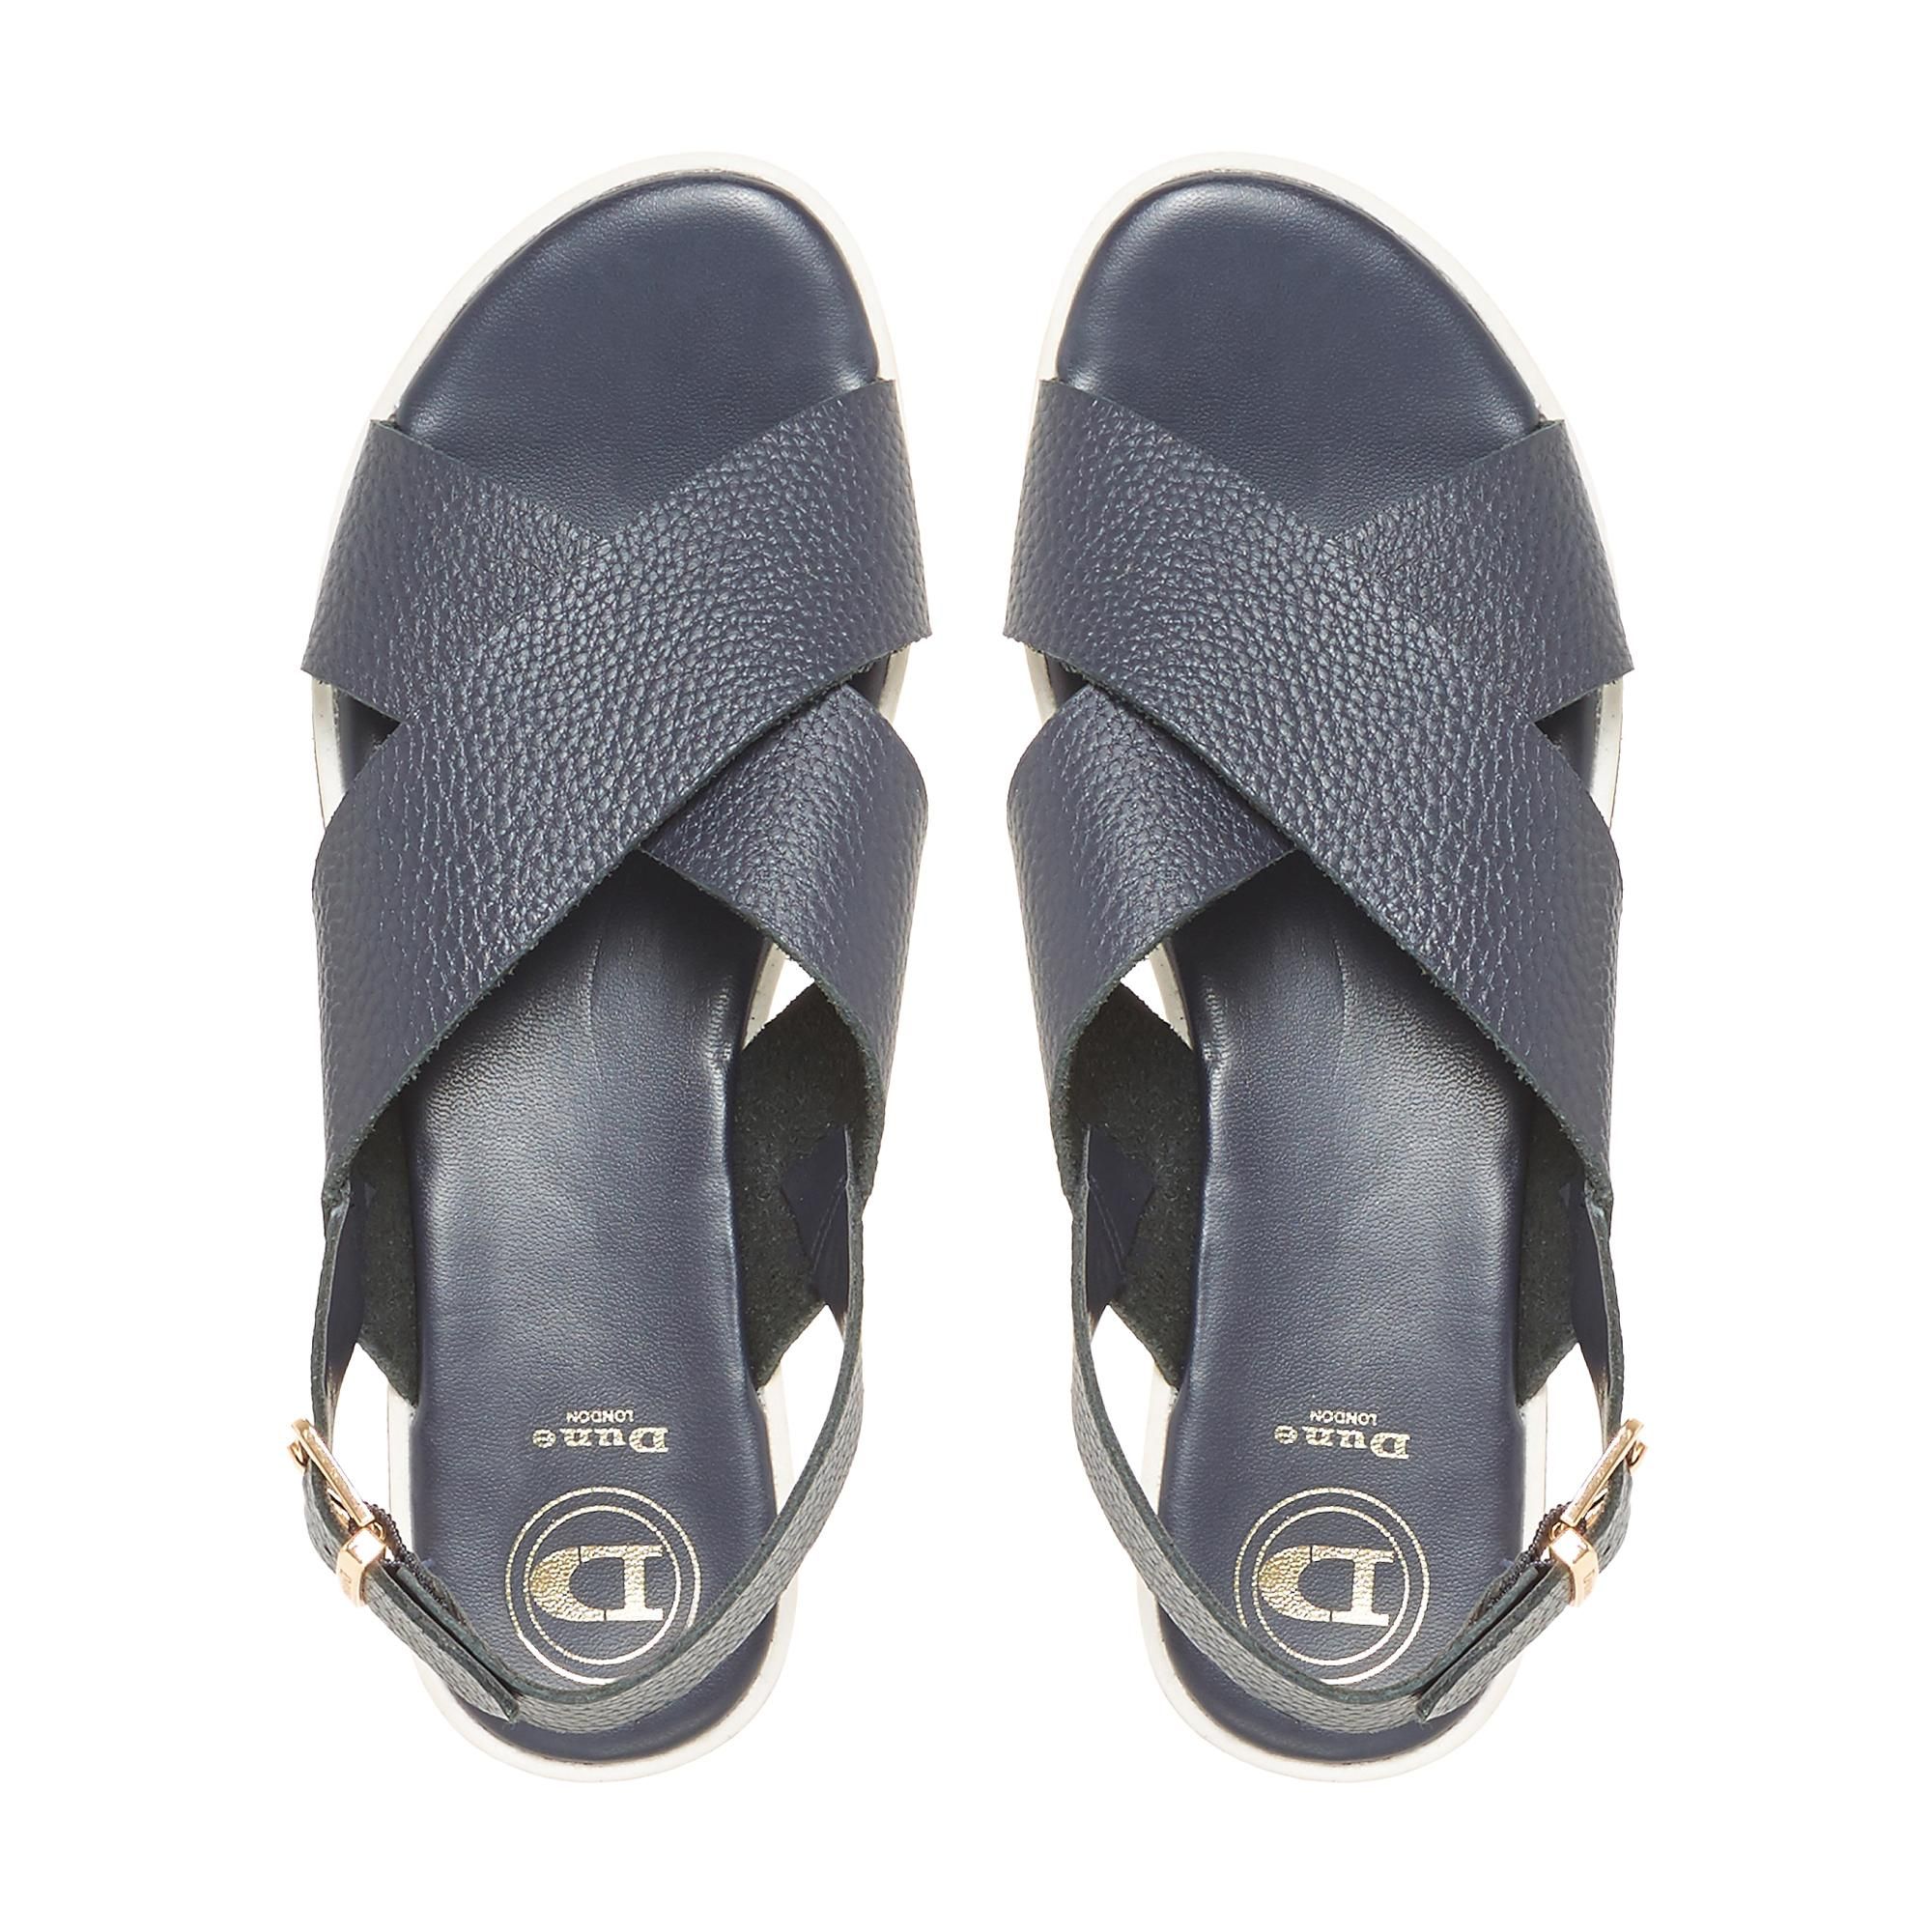 Channel casual elegance with this fetching Dune London sandal. Designed with stylish cross straps and a buckle fastening at the ankle. A flat cork heel and shark sole complete this summer style.